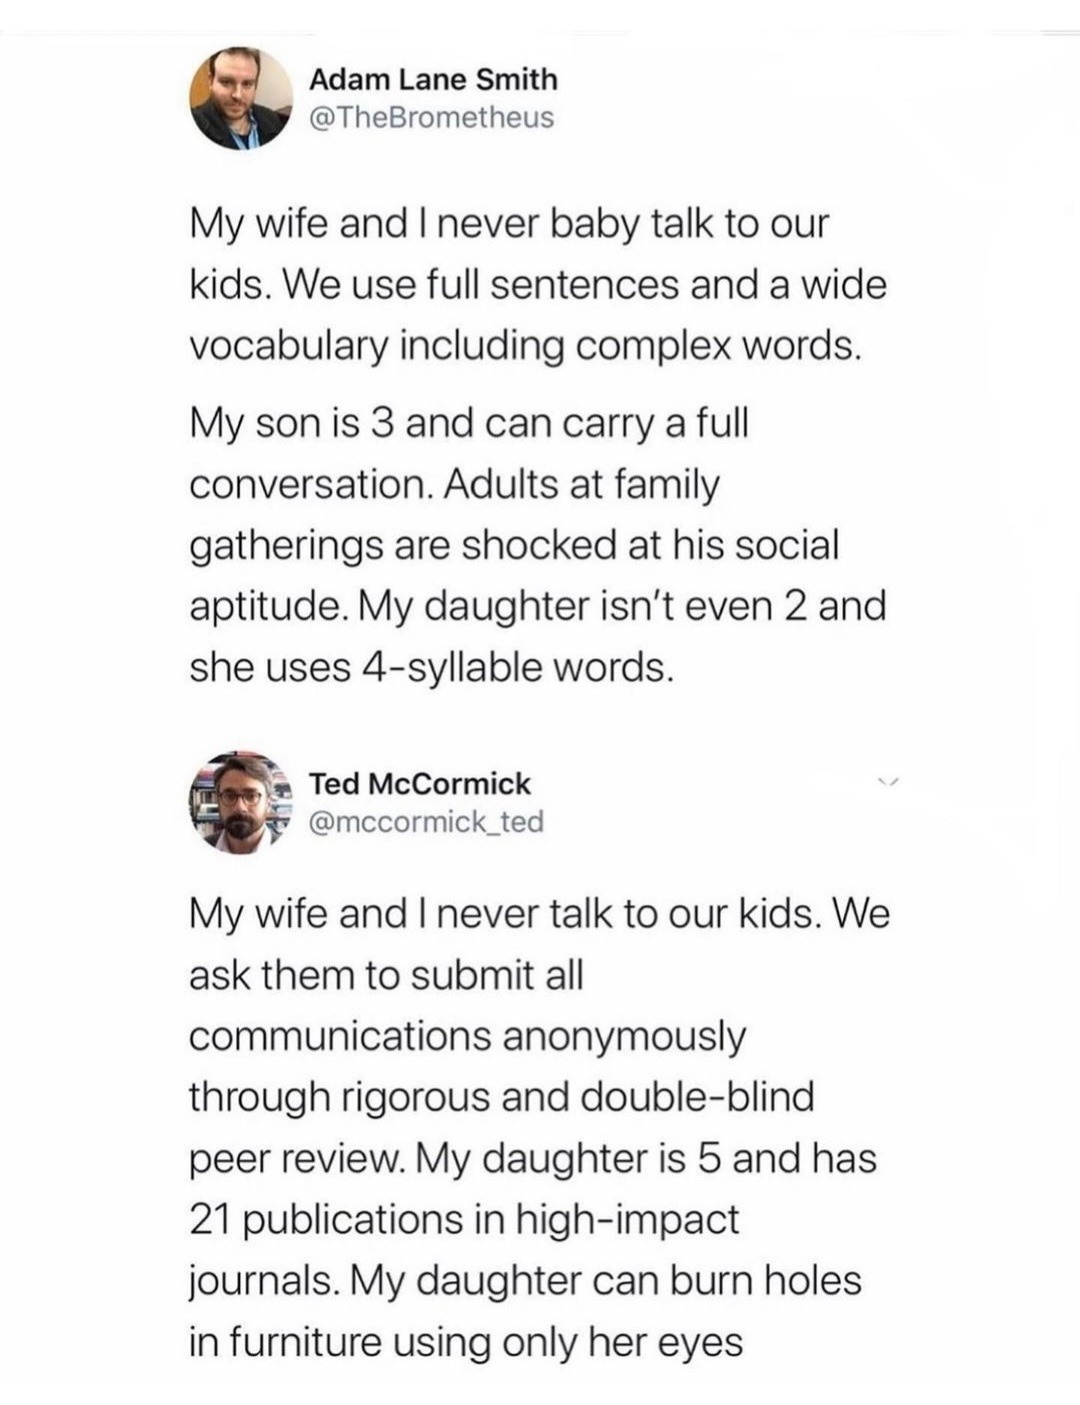 Bro legit thinks he's the only parent and outsmarted all other parents. Shut the fuck up - meme